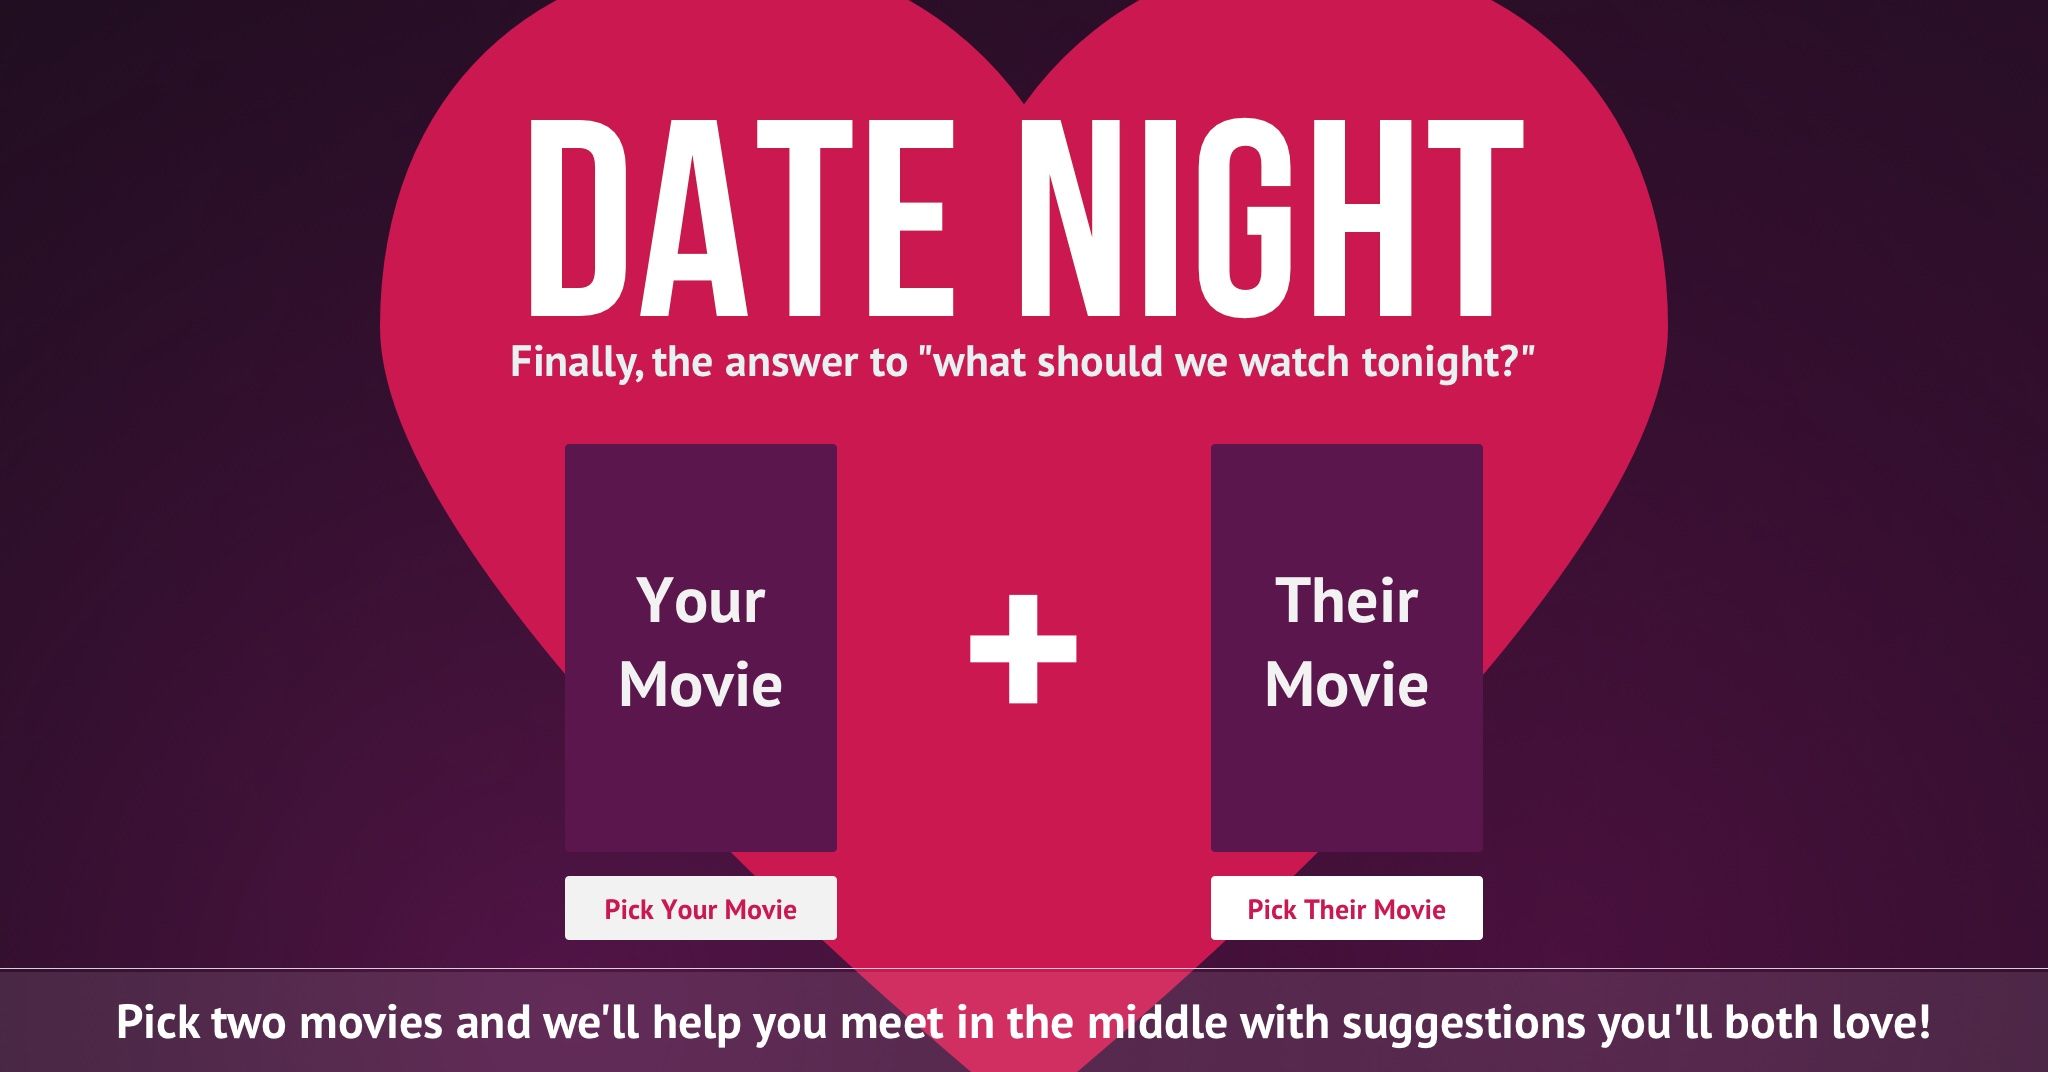 Movie Recommendations For Date Night